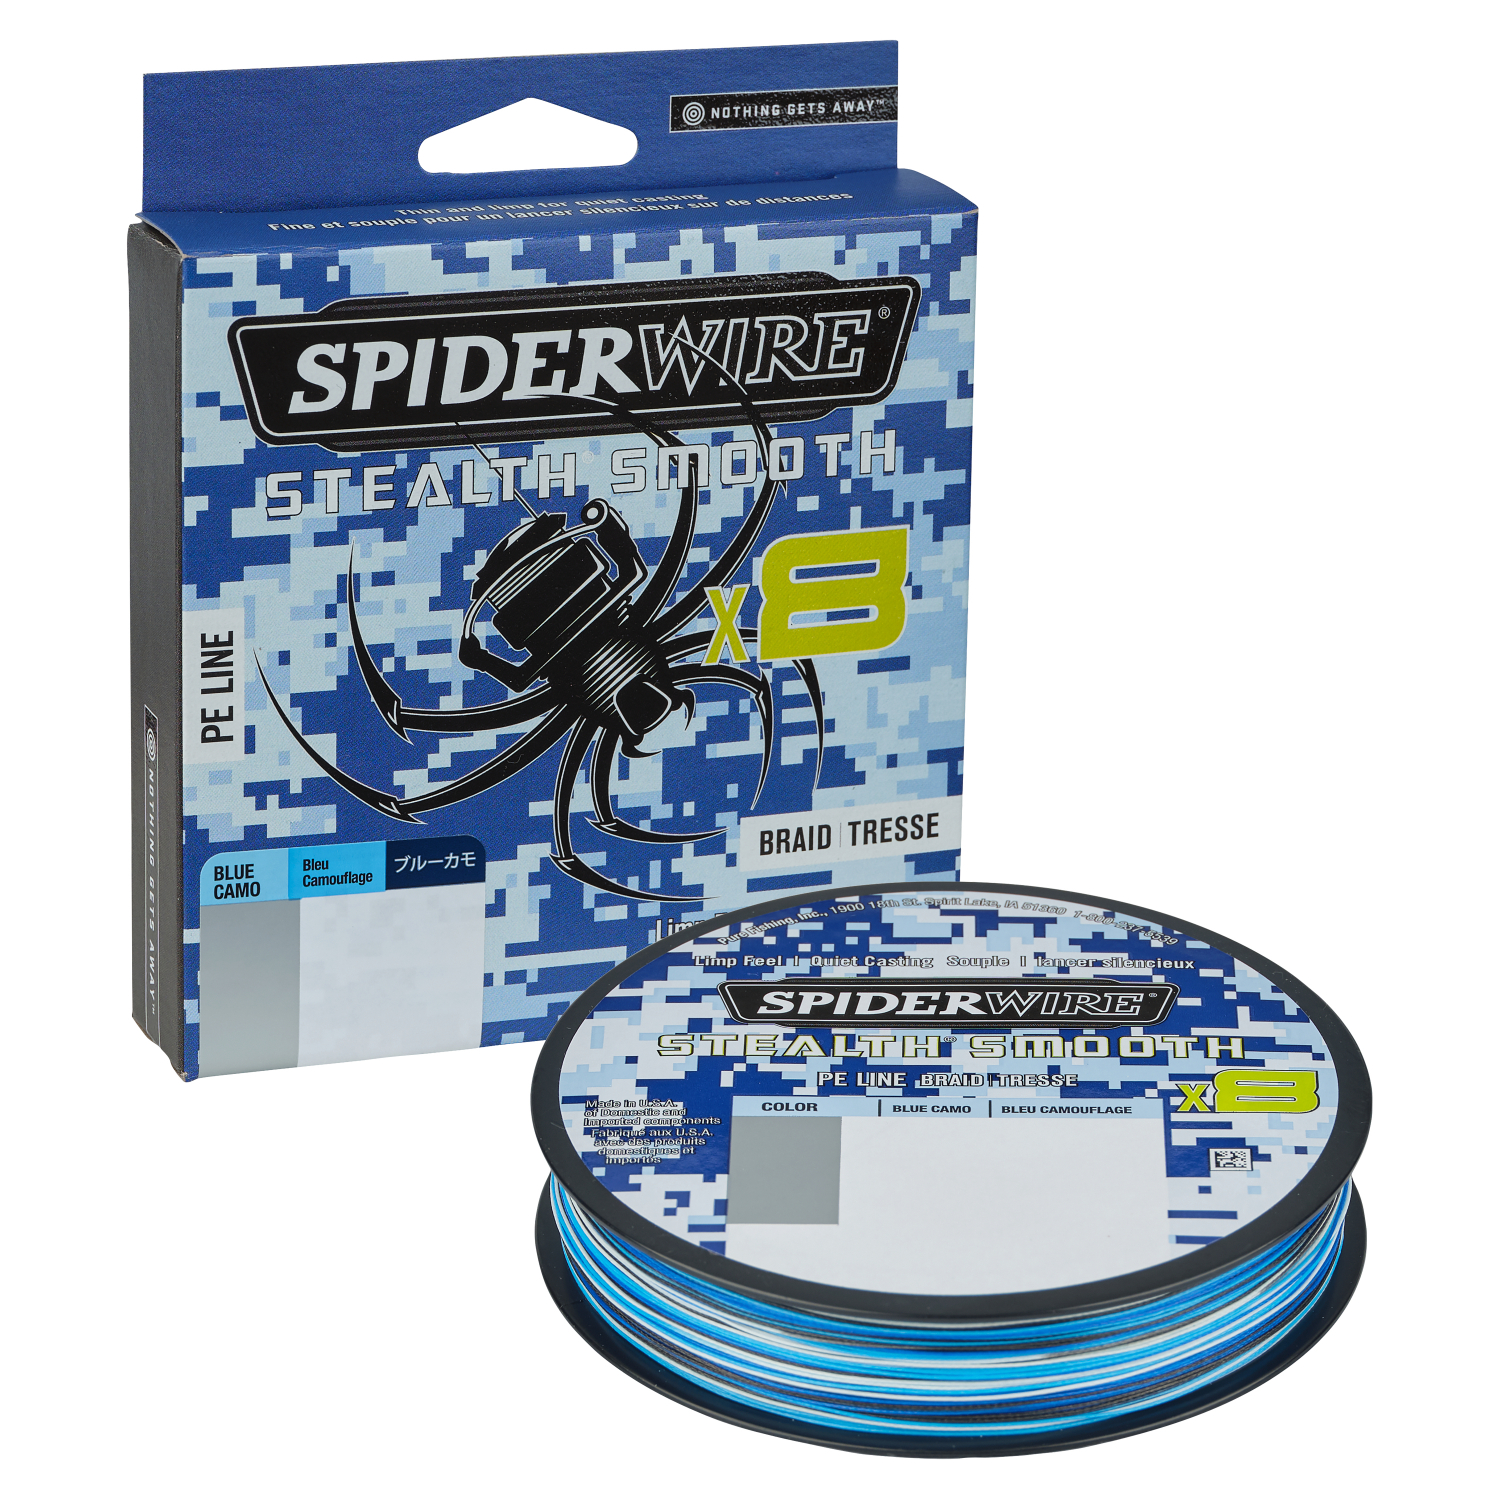 Spiderwire Fishing Line Stealth Smooth 8 (Blue Camo) 